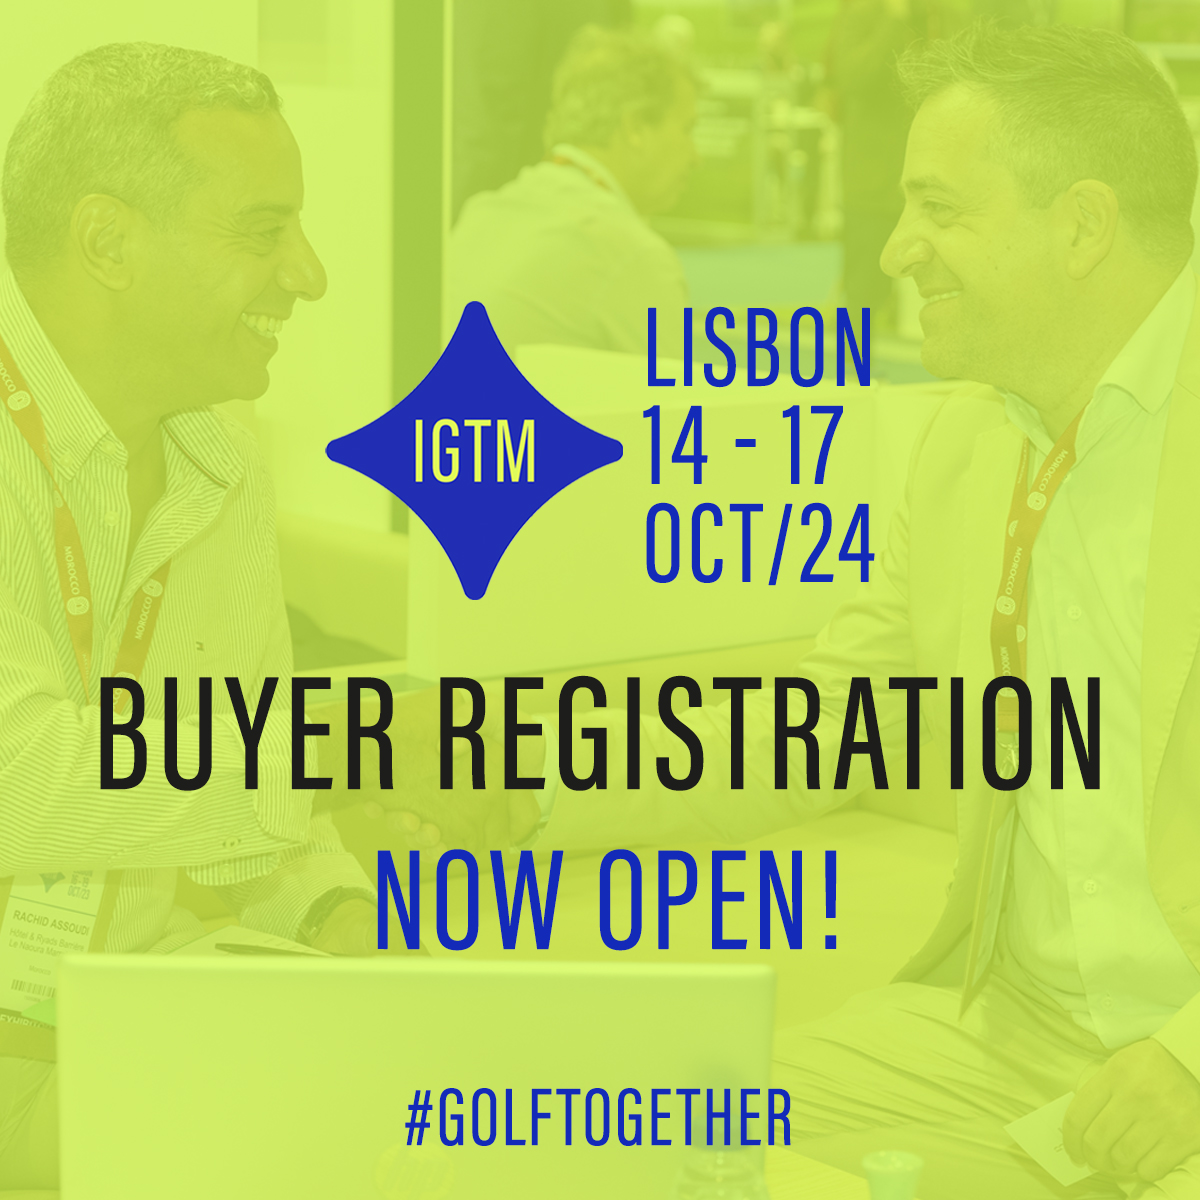 Buyer registration now open! 📝 We have already had 50+ buyers register for this year's IGTM in Lisbon. Email invitations have been sent out, but if you don’t have the email or want to enquire, please follow the link below 👇 igtmarket.com/en-gb/forms/re…